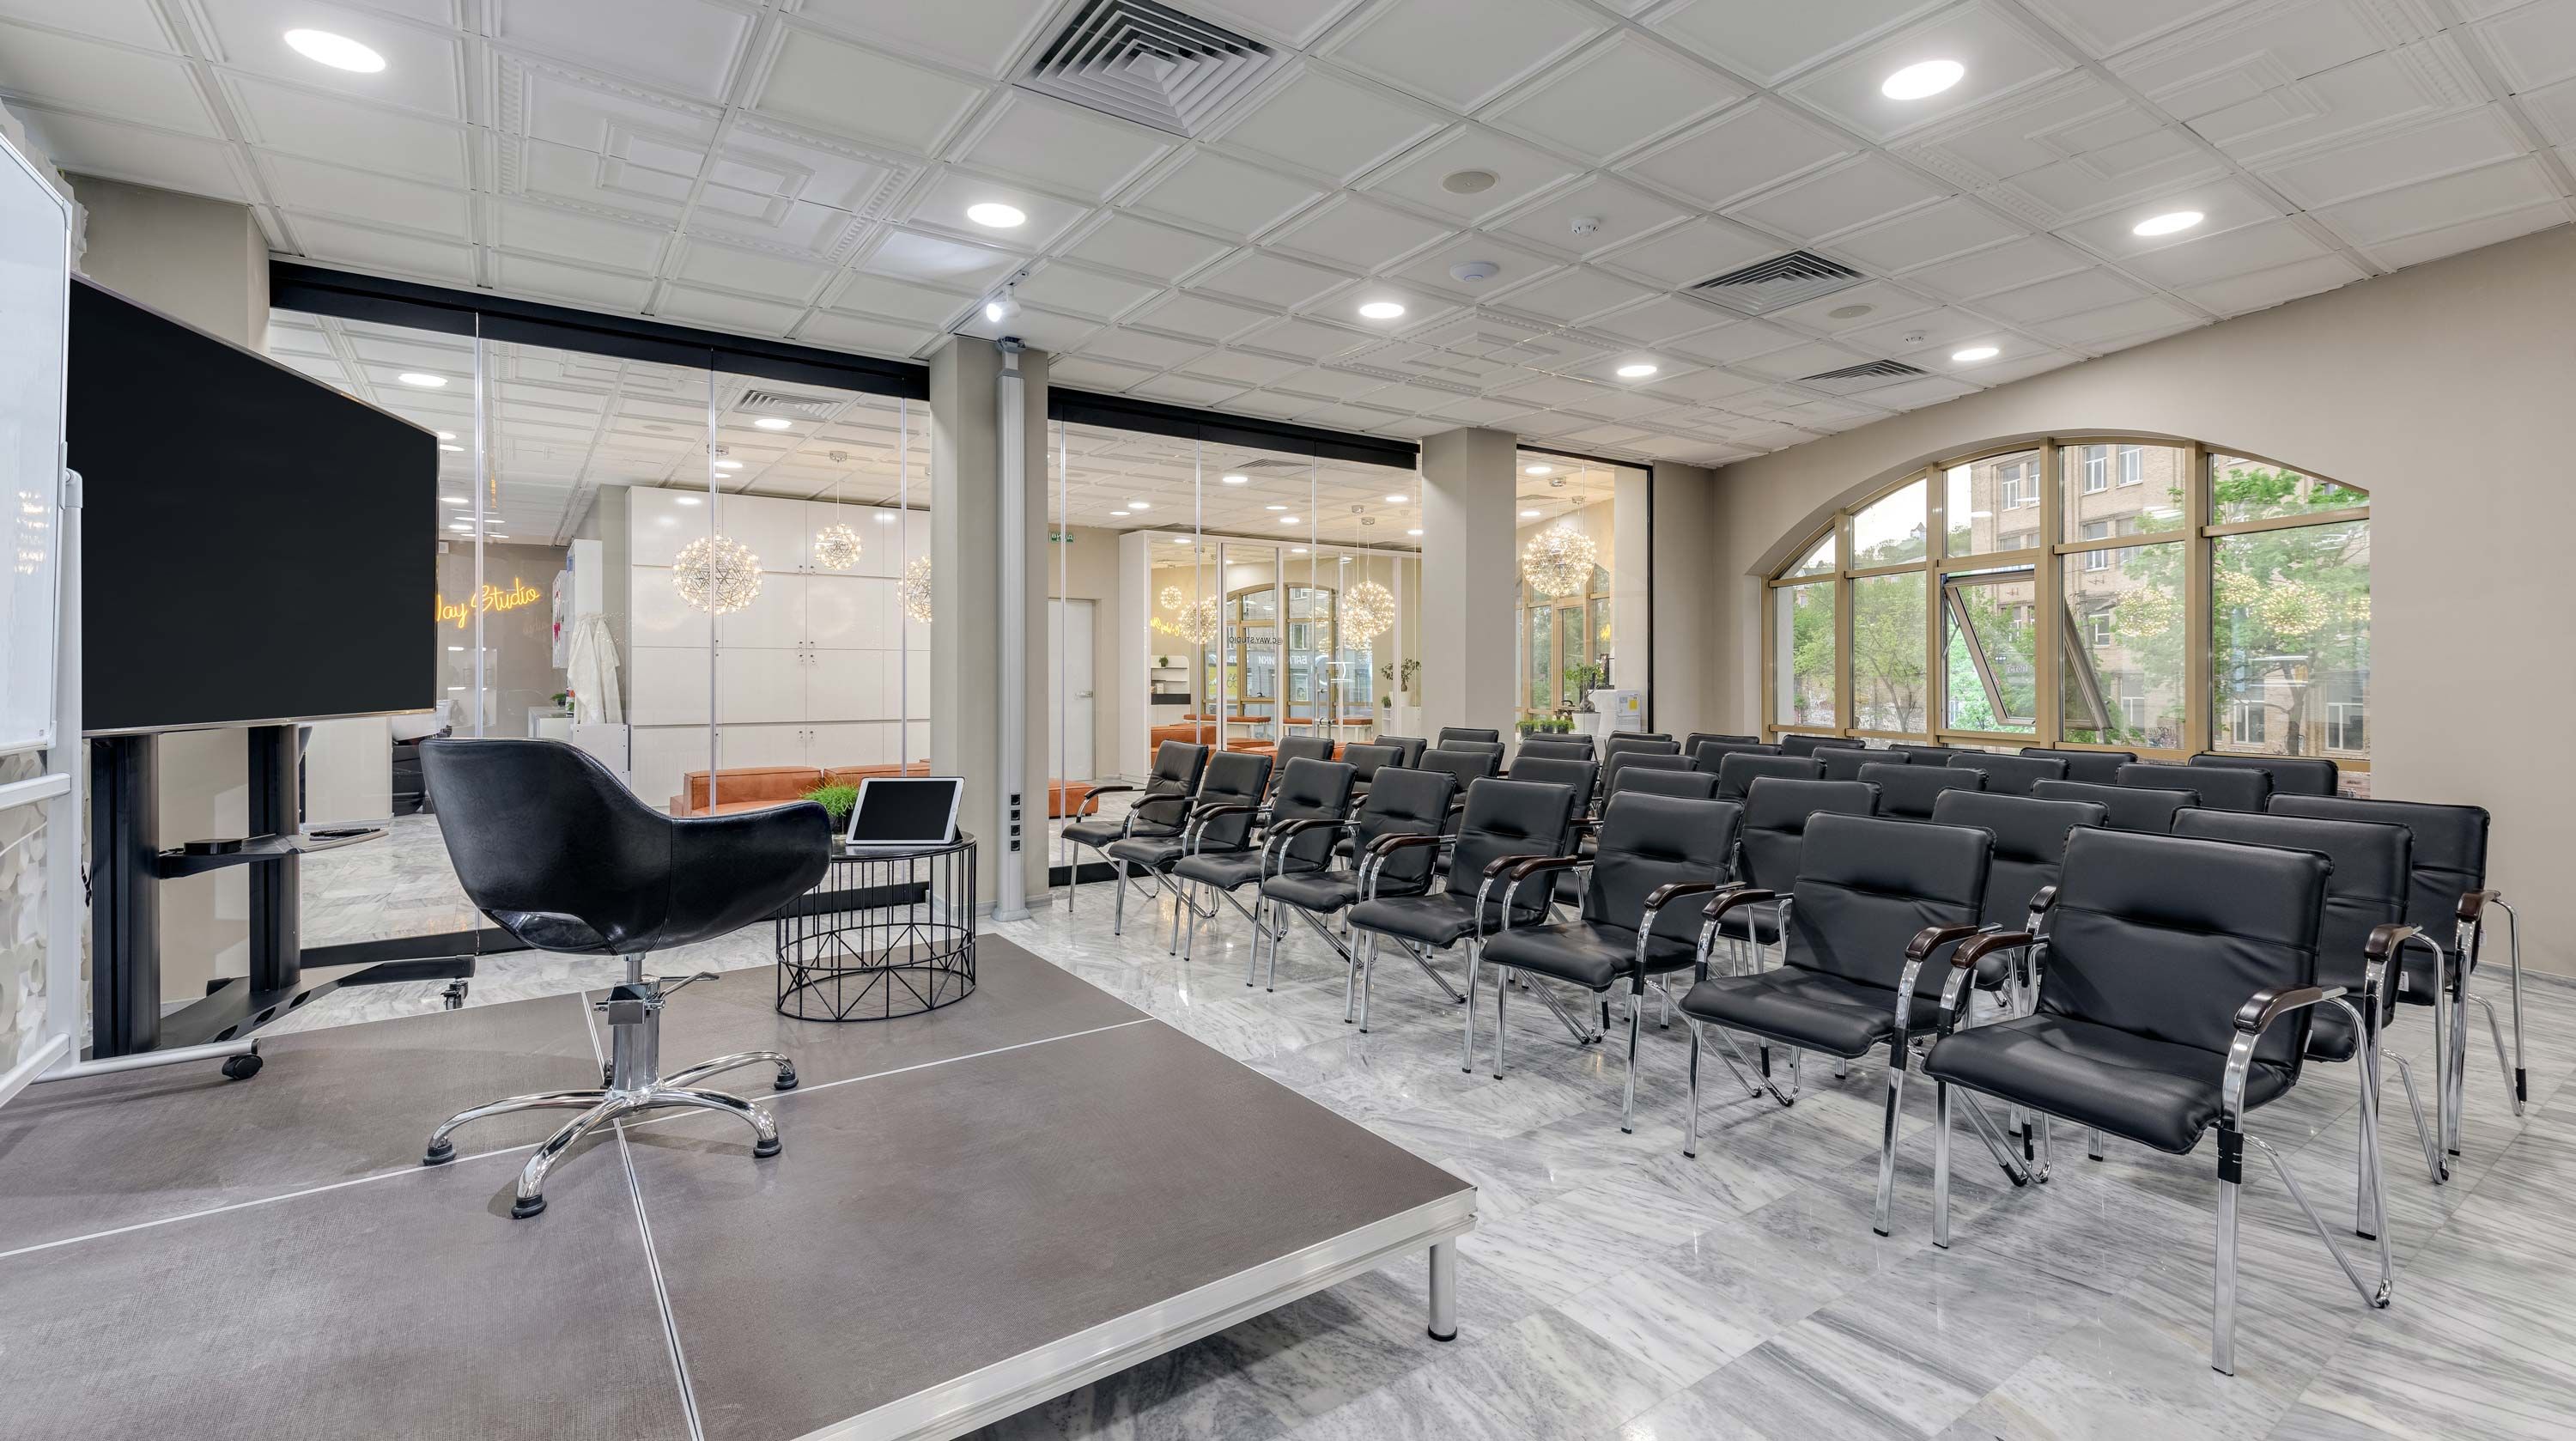 training spaces with black chairs and presentation technology